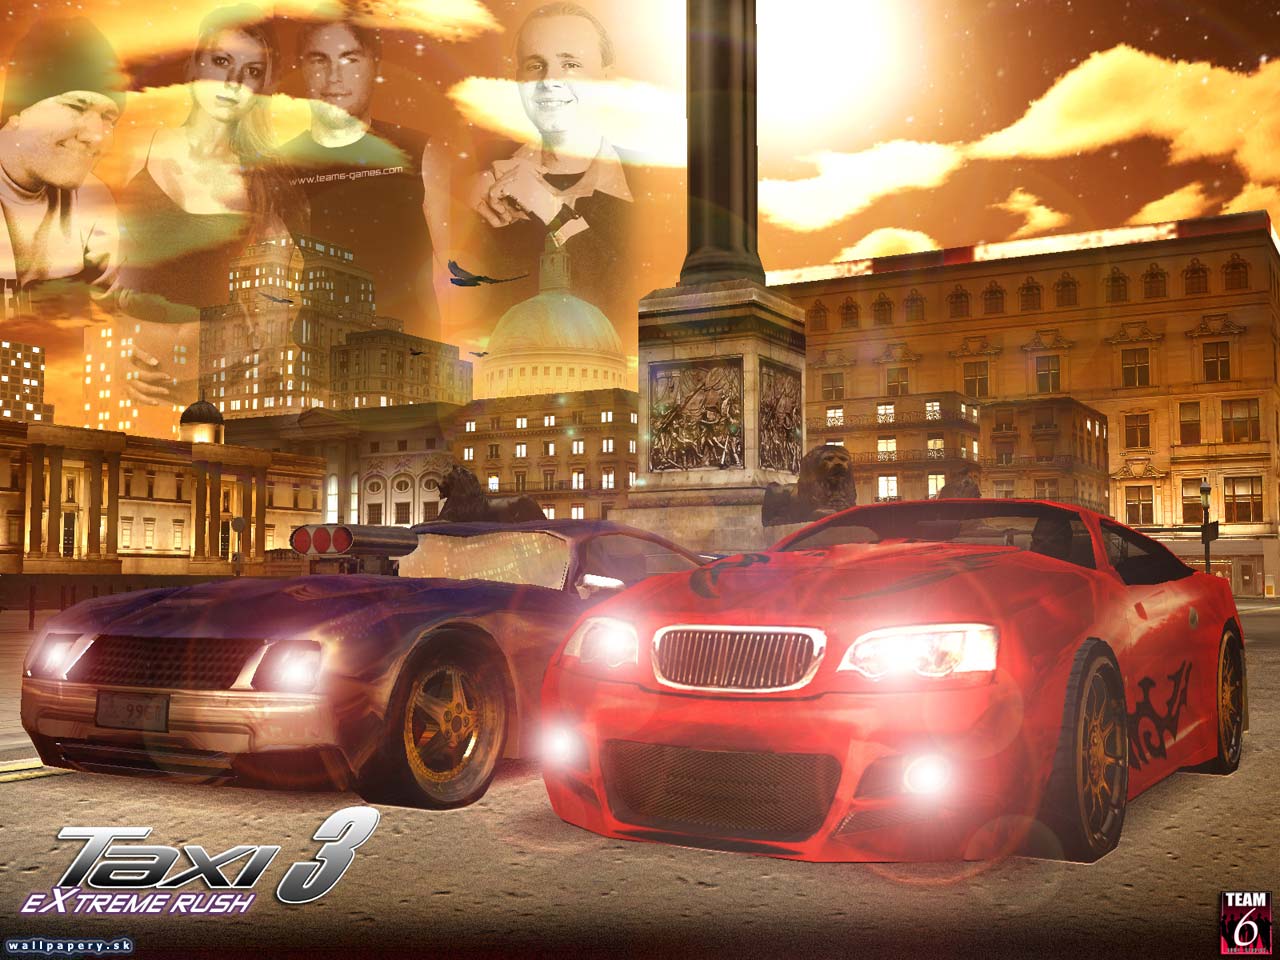 Taxi 3: eXtreme Rush - wallpaper 2